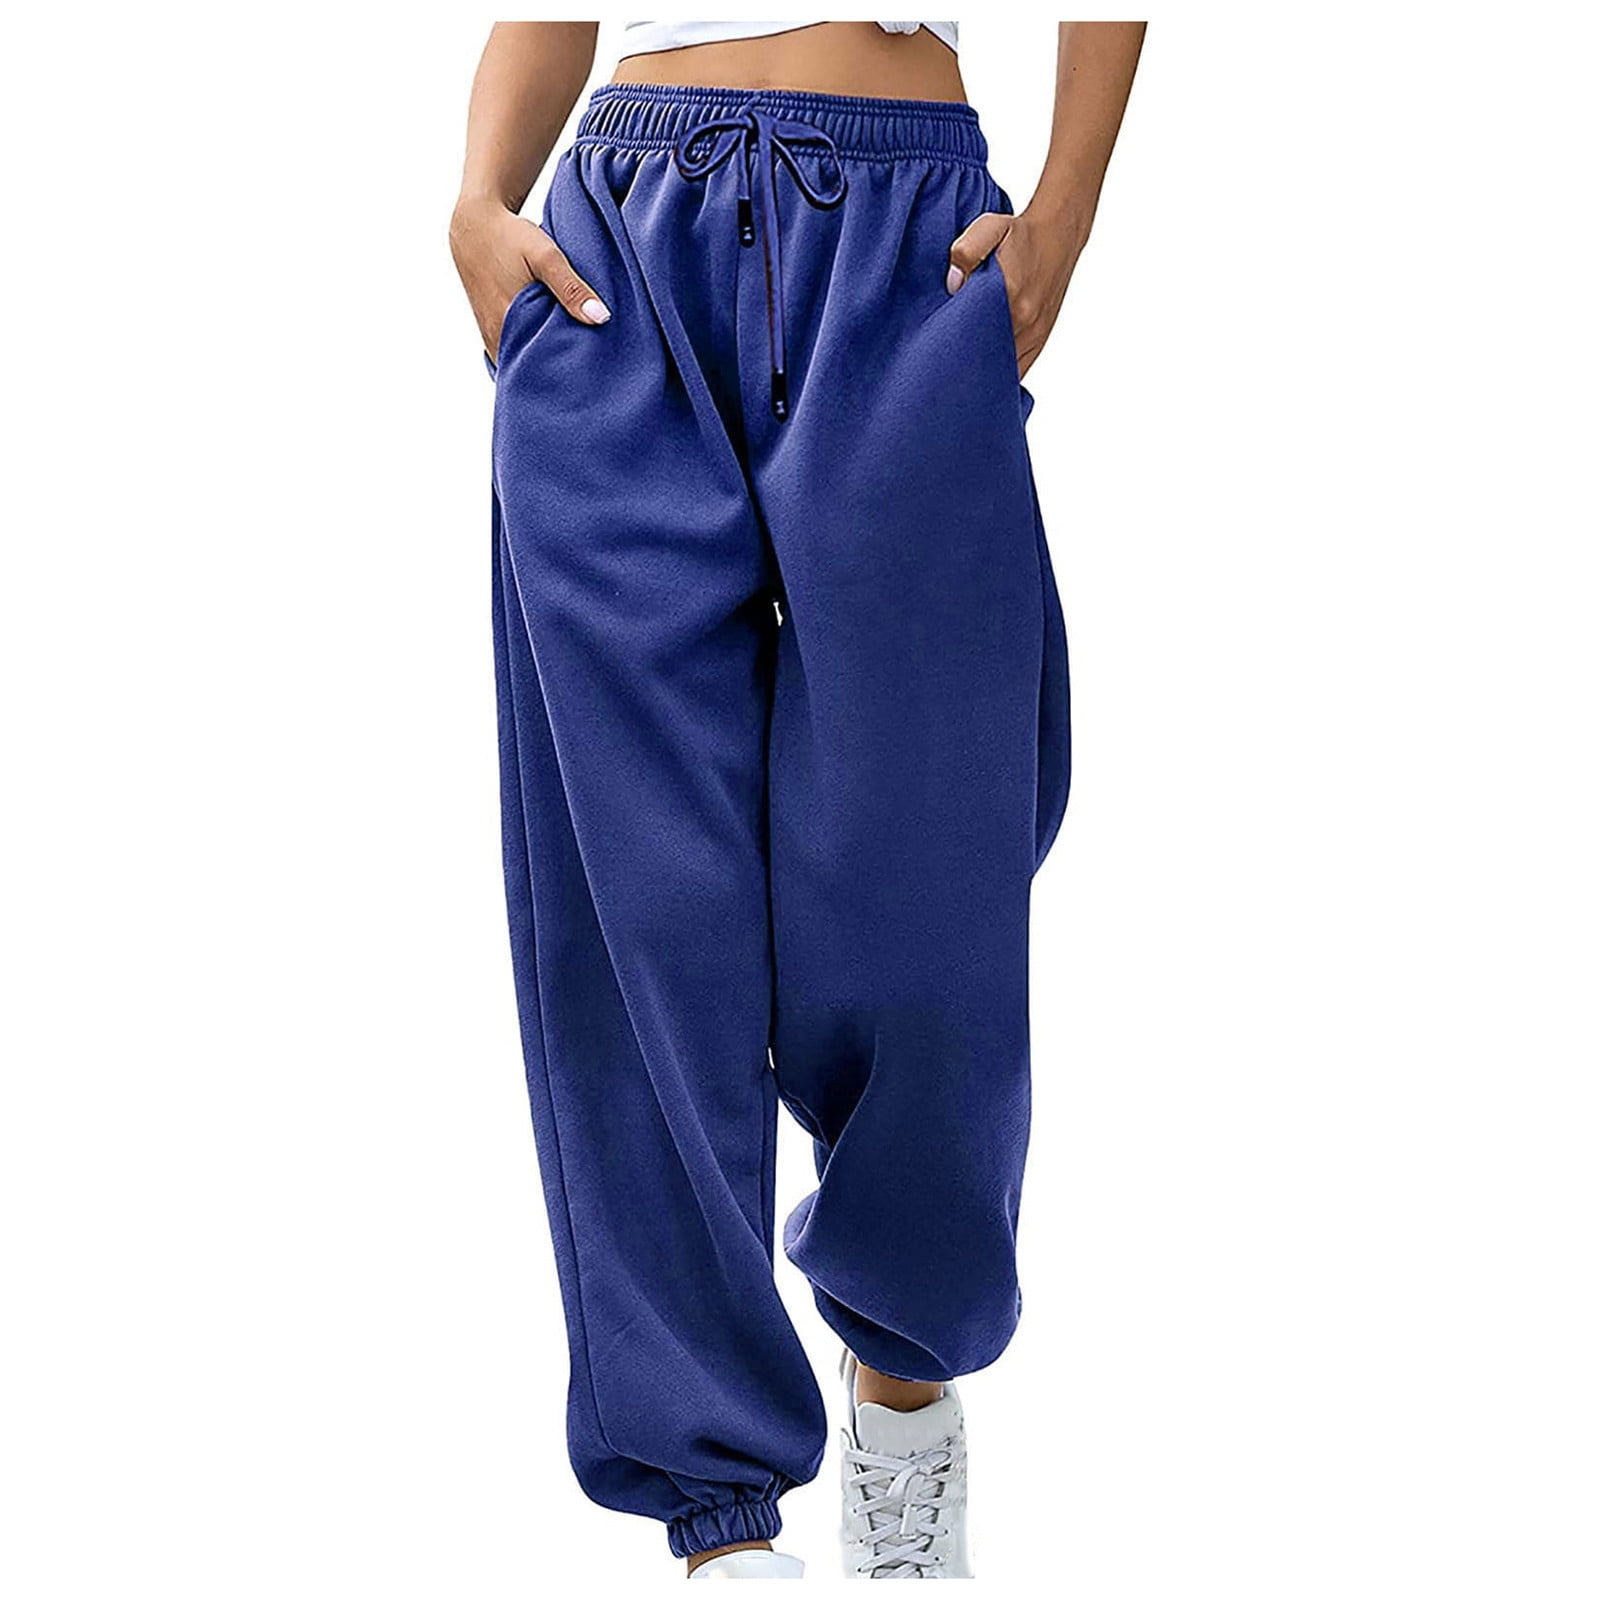 Knosfe Petite Sweatpants for Women Drawstring Cinch Bottom Running Cute  Sweatpants Teens High Waisted Teen Girls Women Joggers Wide Leg Comfortable  with Pockets Loose Baggy Pants Coffee M 